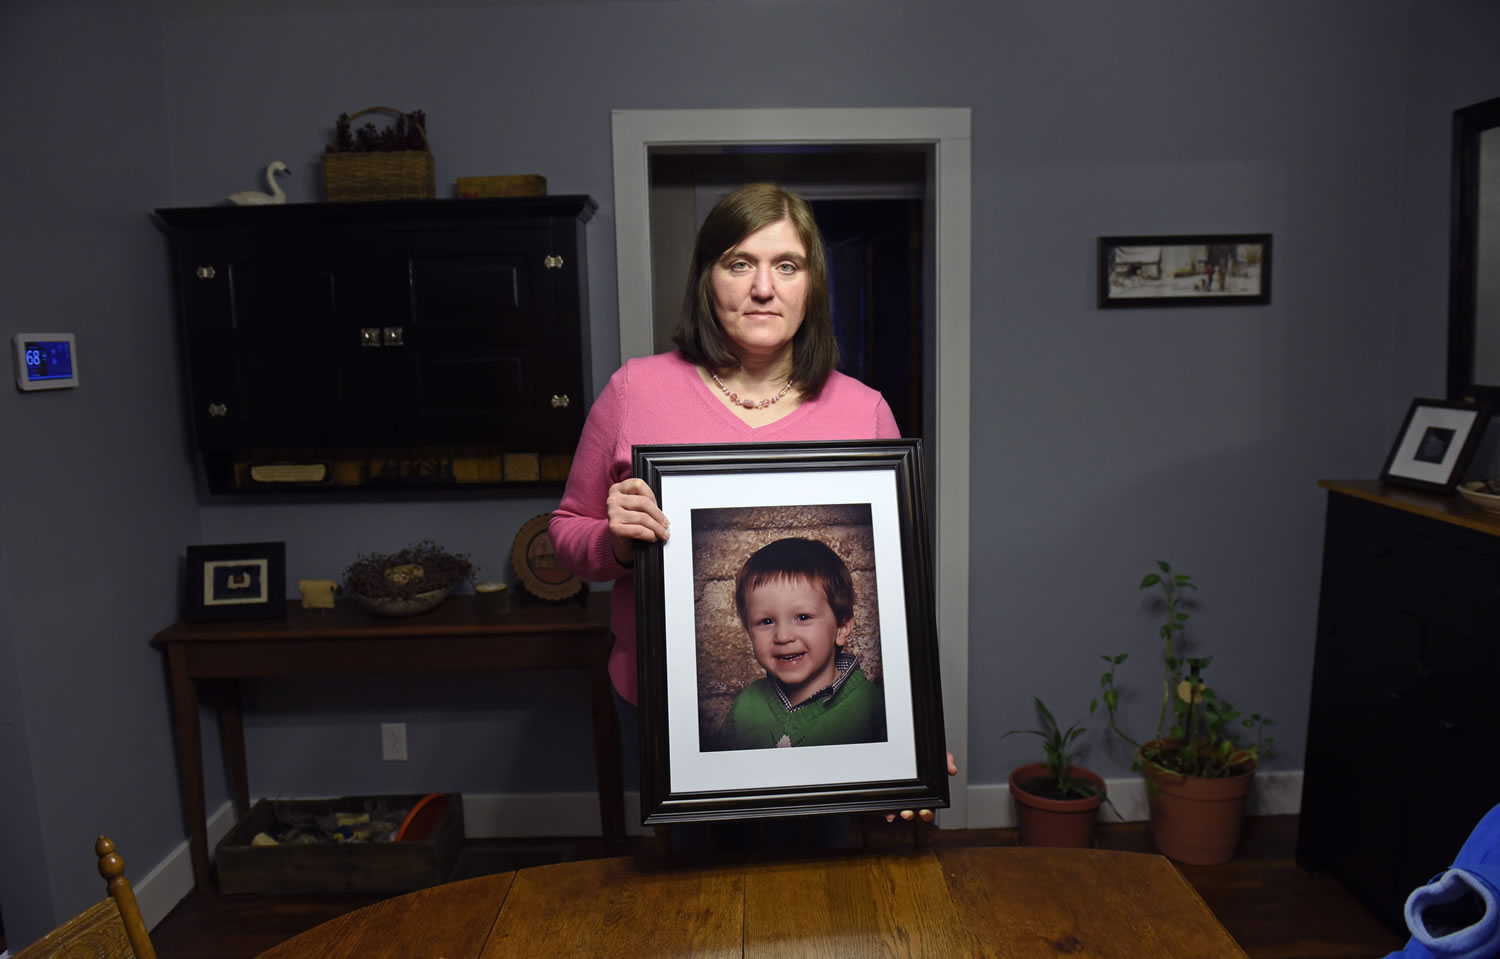 Hollie Ayers holds a photograph of her late son, Michael, 2, at her home in Bedford, Pa. Michael was shot and killed in front of her by her abusive ex-husband in 2013. Ayers was shot in the face and the leg, and her ex-husband killed himself after the rampage.